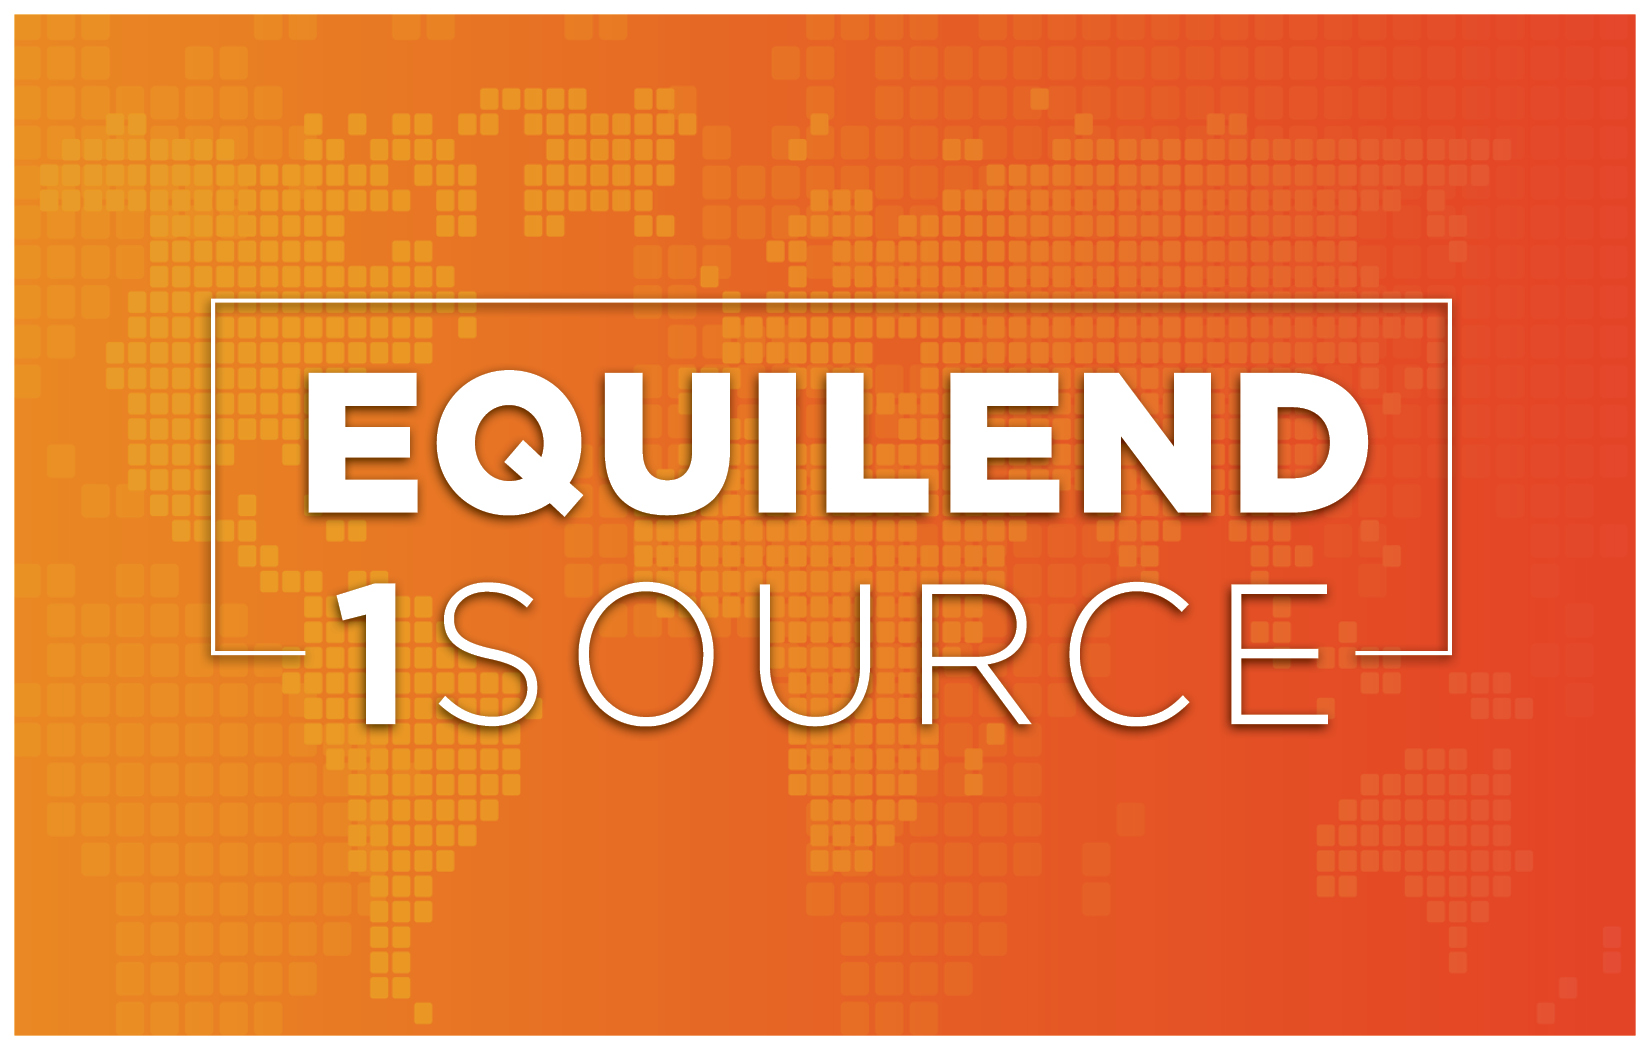 DLT-Based EquiLend 1Source Pilot Kicks Off With Broad Industry Participation